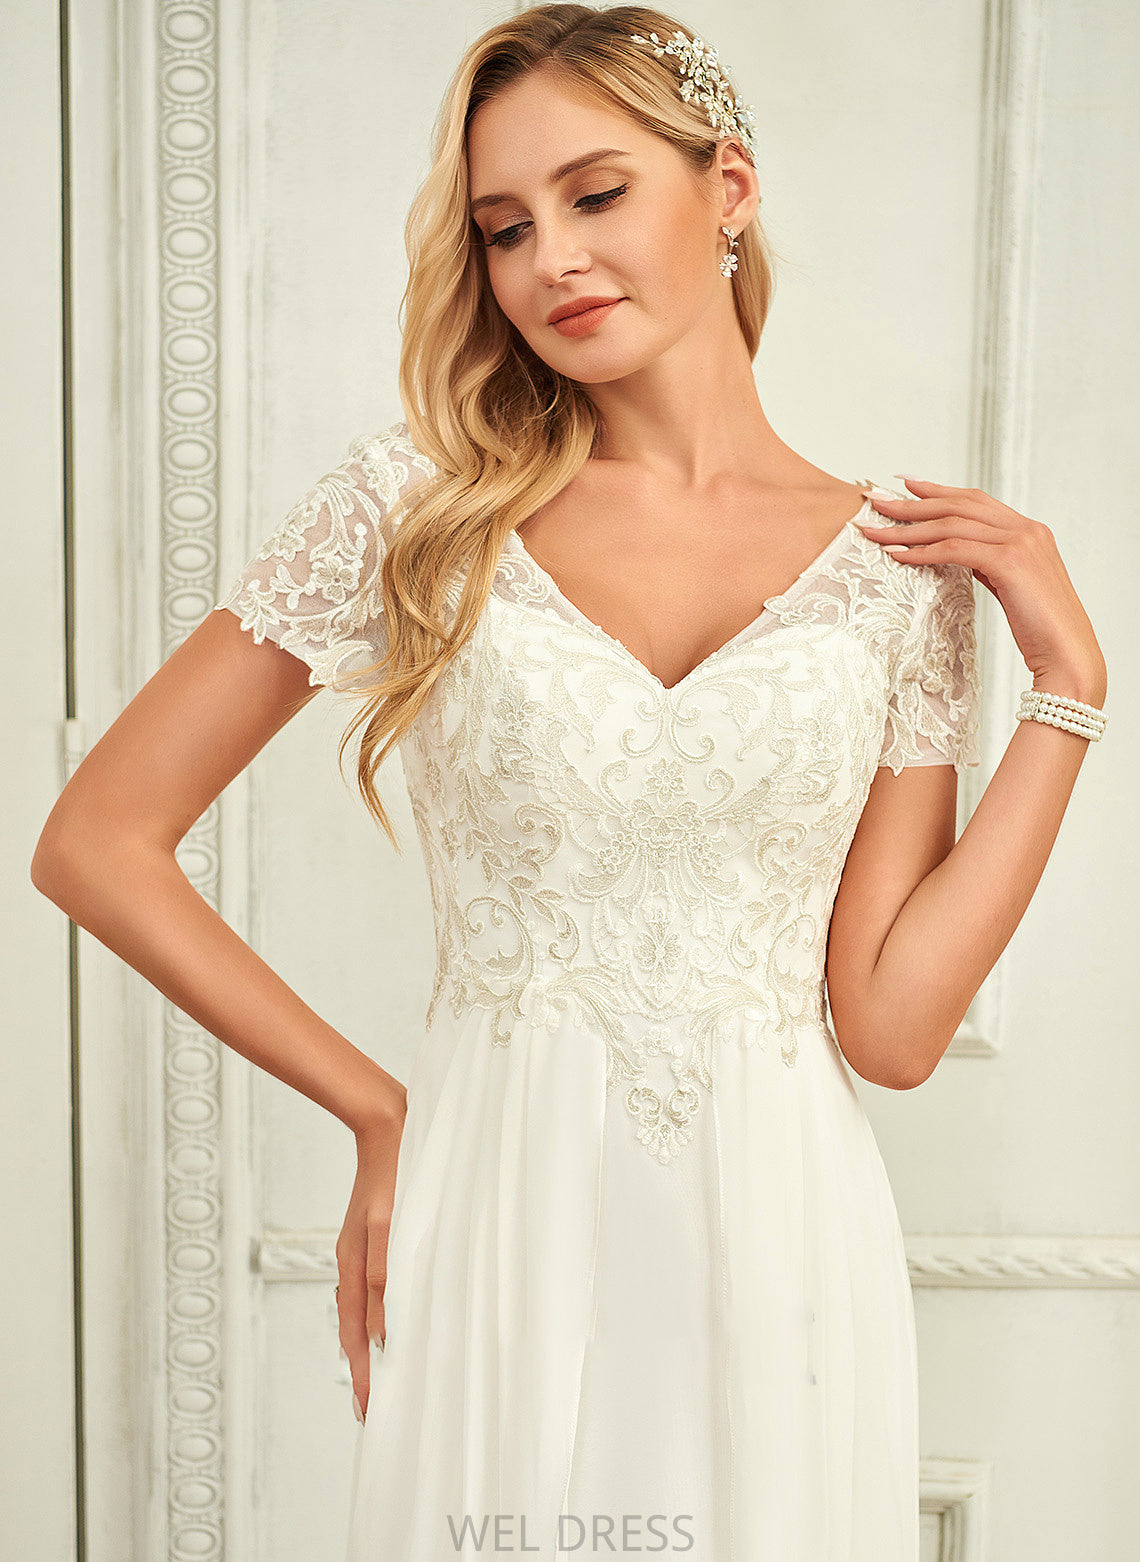 Wedding With Floor-Length Taliyah Lace Chiffon A-Line Lace V-neck Dress Wedding Dresses